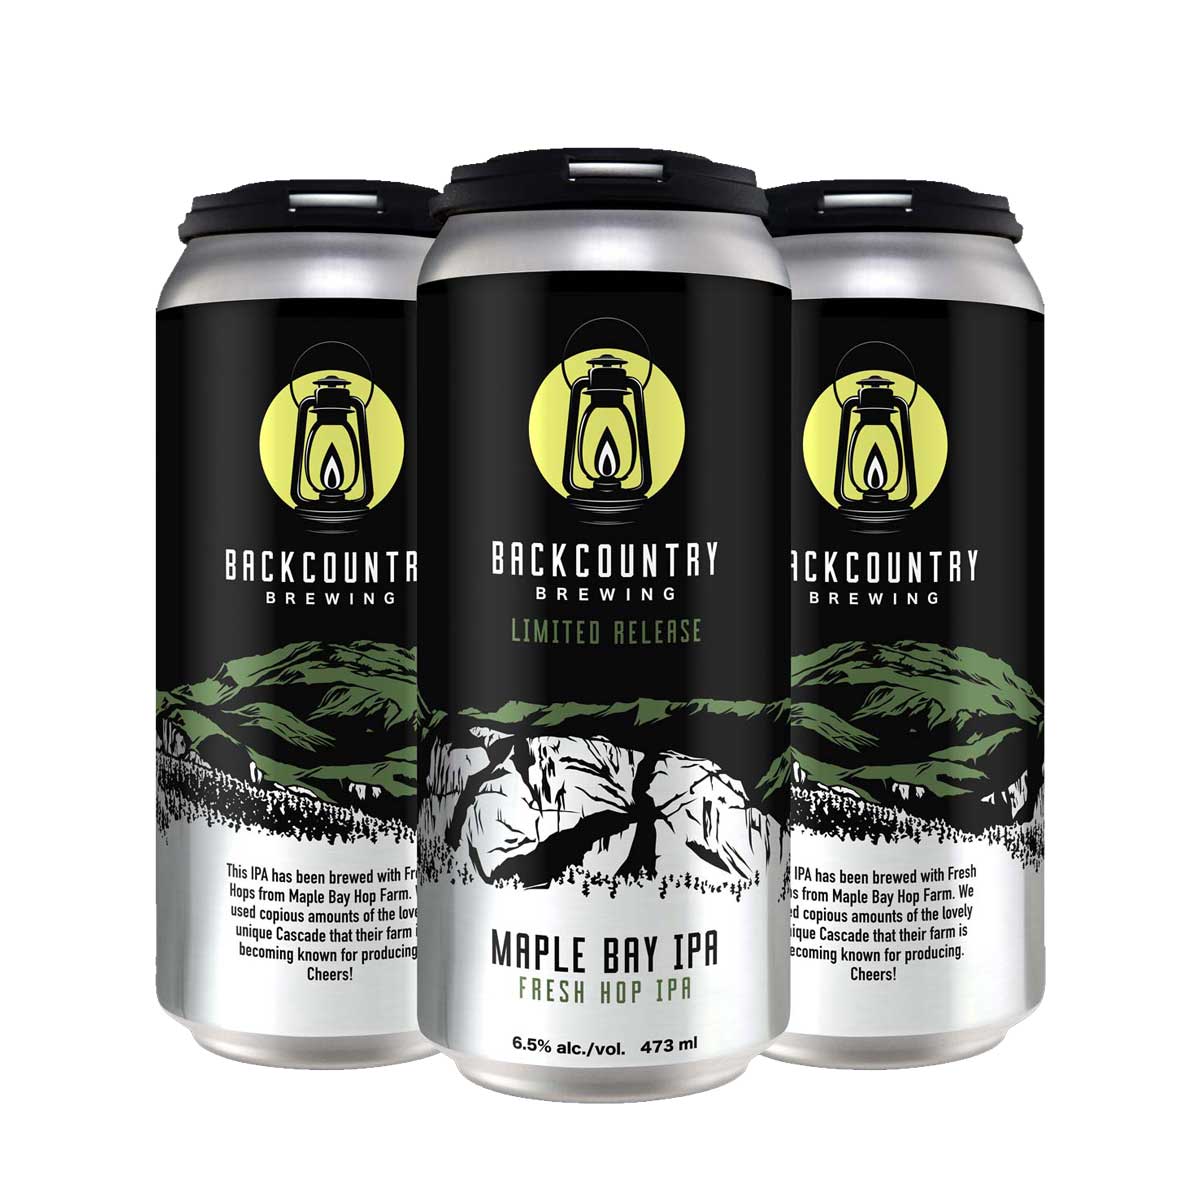 TAG Liquor Stores BC - Backcountry Brewing "Maple Bay IPA" Fresh Hops IPA 4 Pack Cans